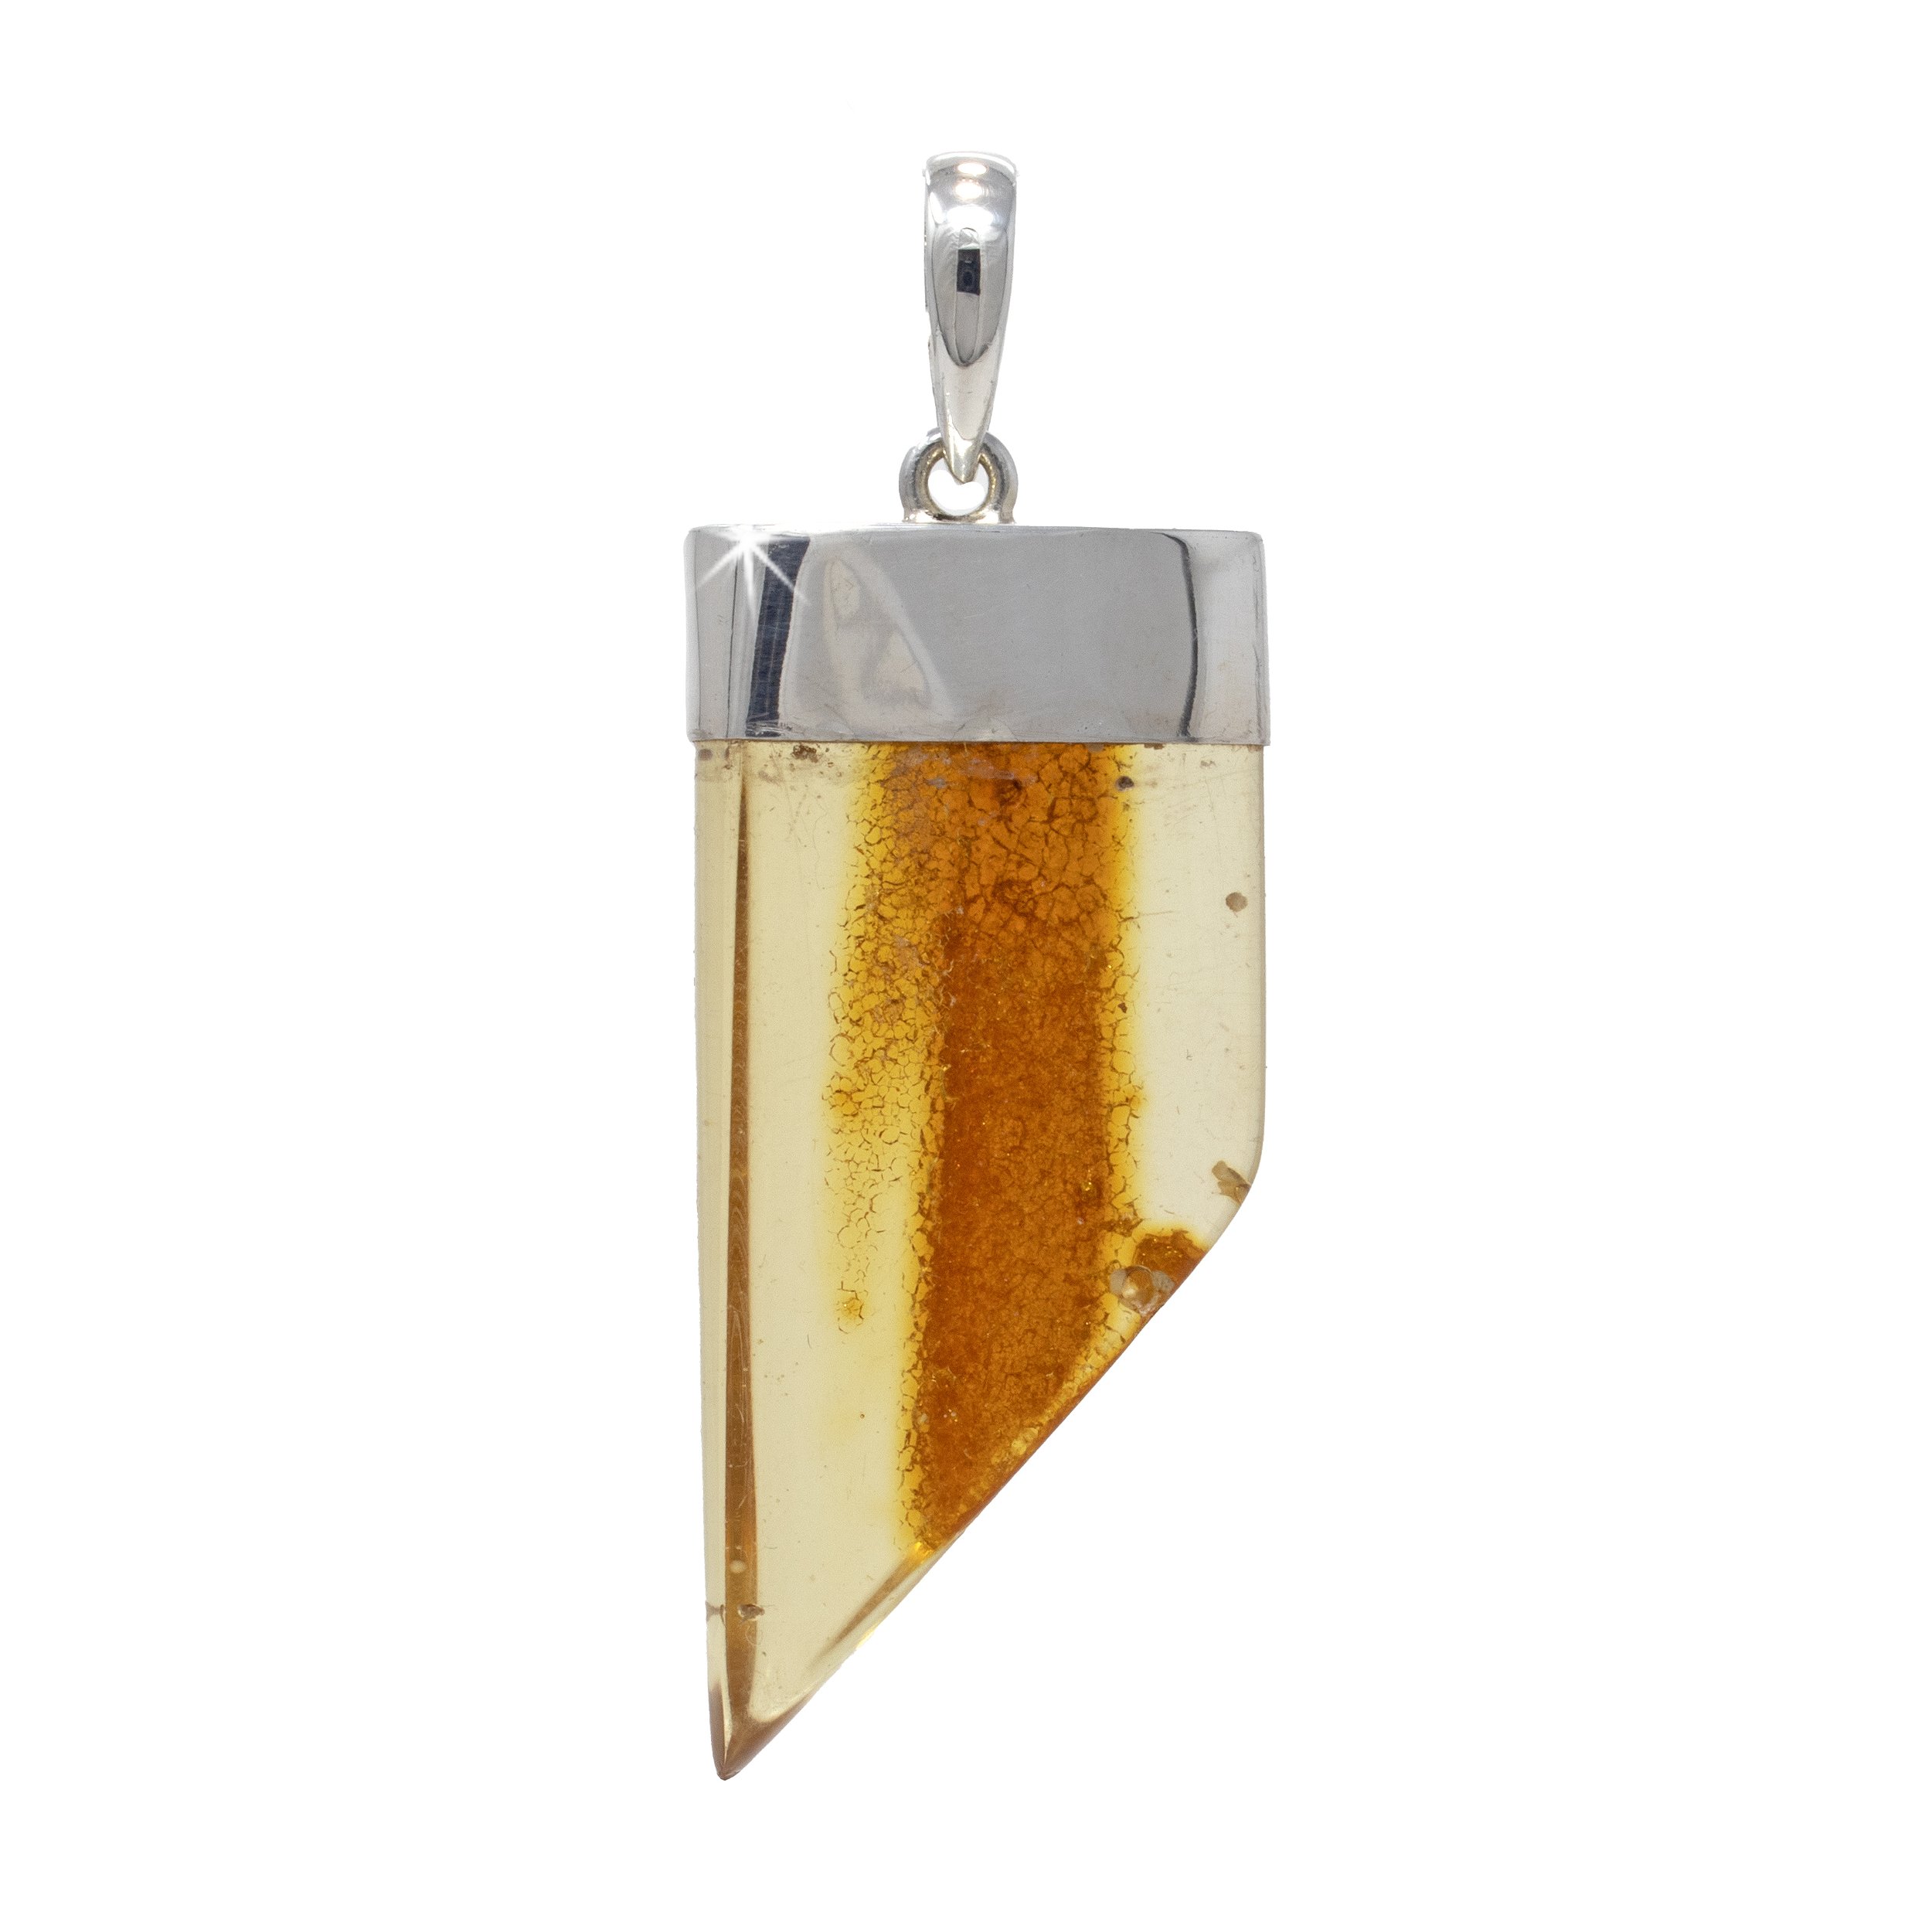 Amber Pendant - Natural Amber Tapered Freeform With Silver Lantern Top Bezel - Semi-translucent Honey Color With Cognac Colored Honeycomb Texture Vein